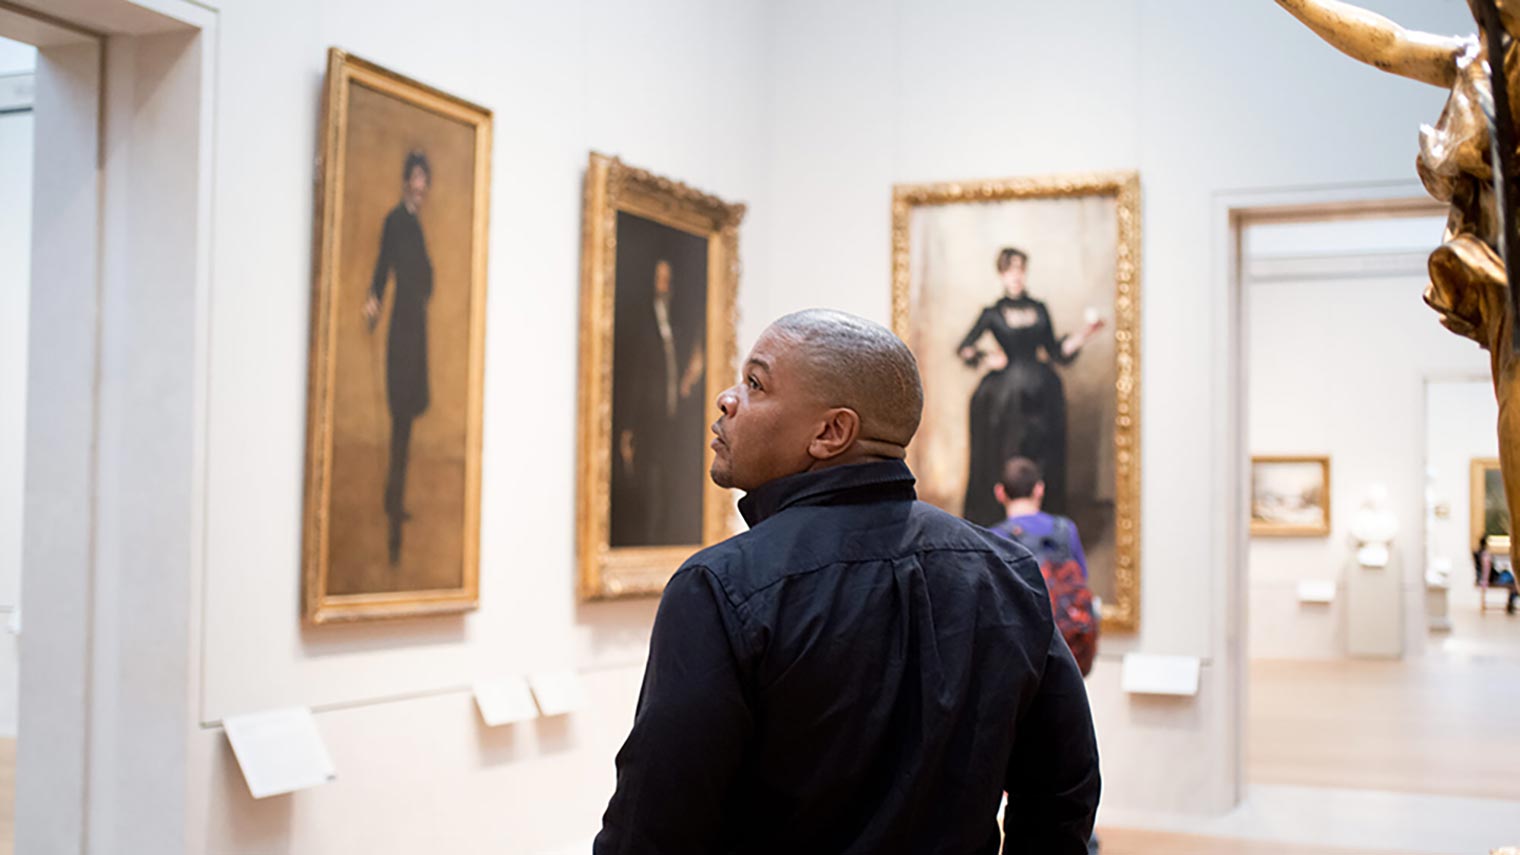 A photograph of the artist Kehinde Wiley walking through the Met's American Wing